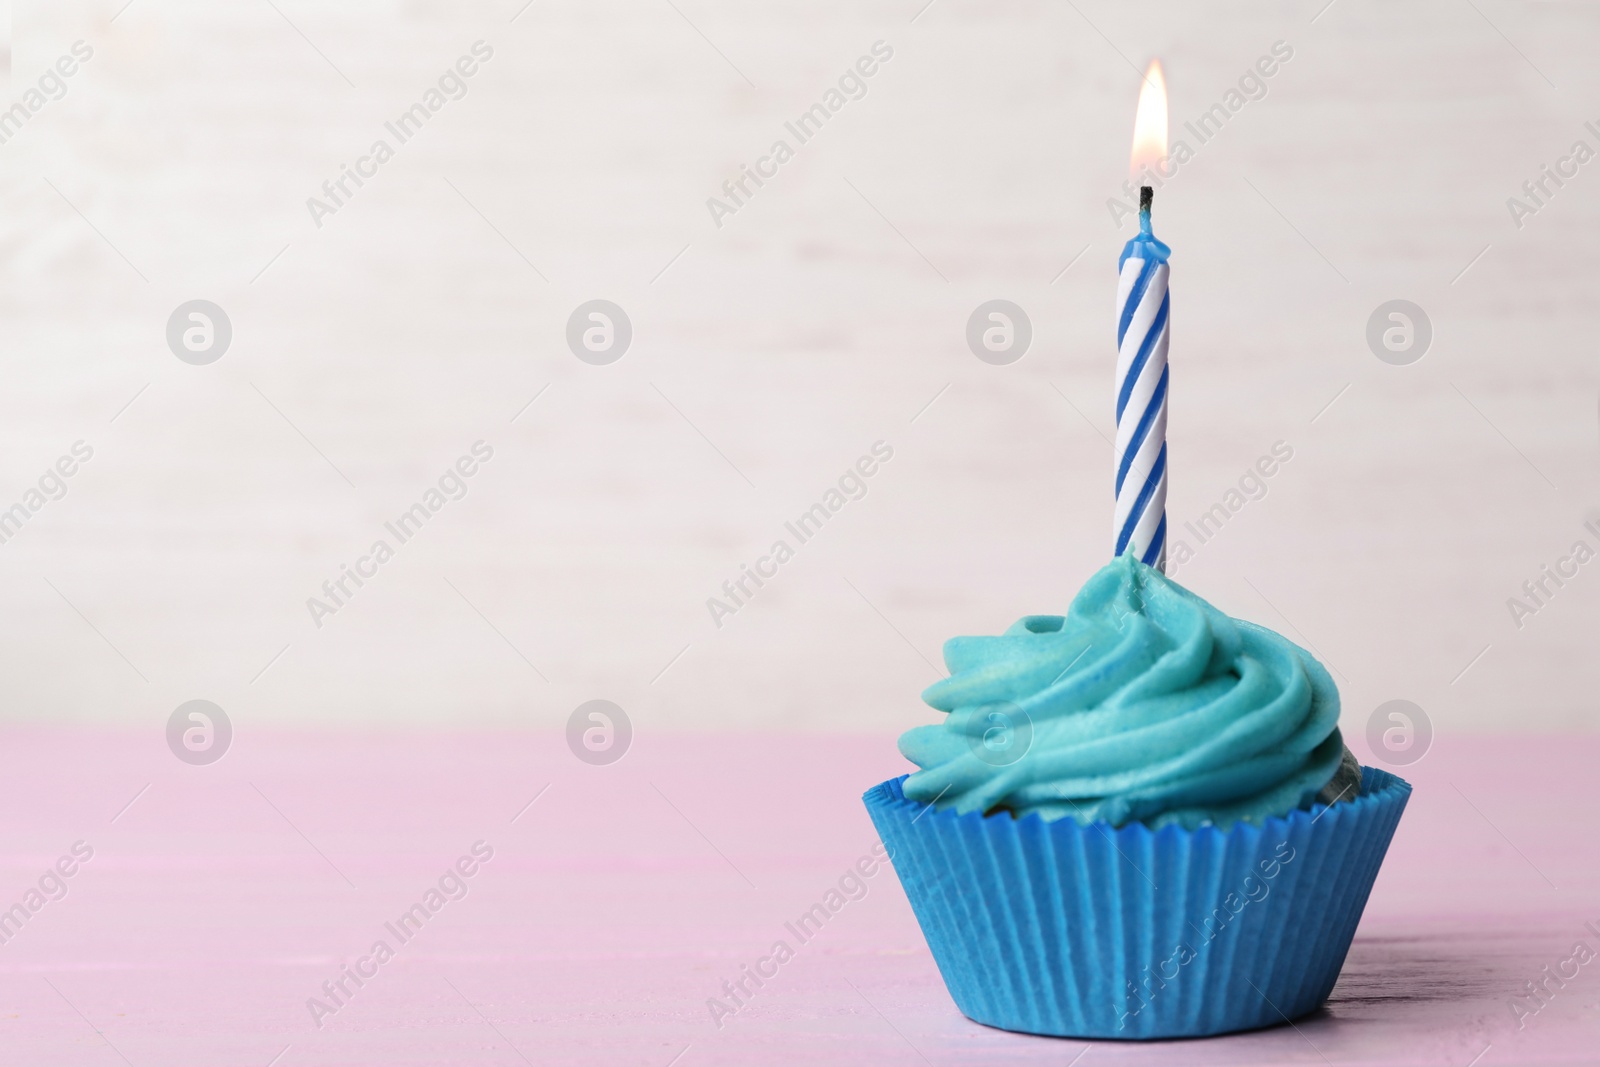 Photo of Delicious birthday cupcake with cream and burning candle on pink table. Space for text